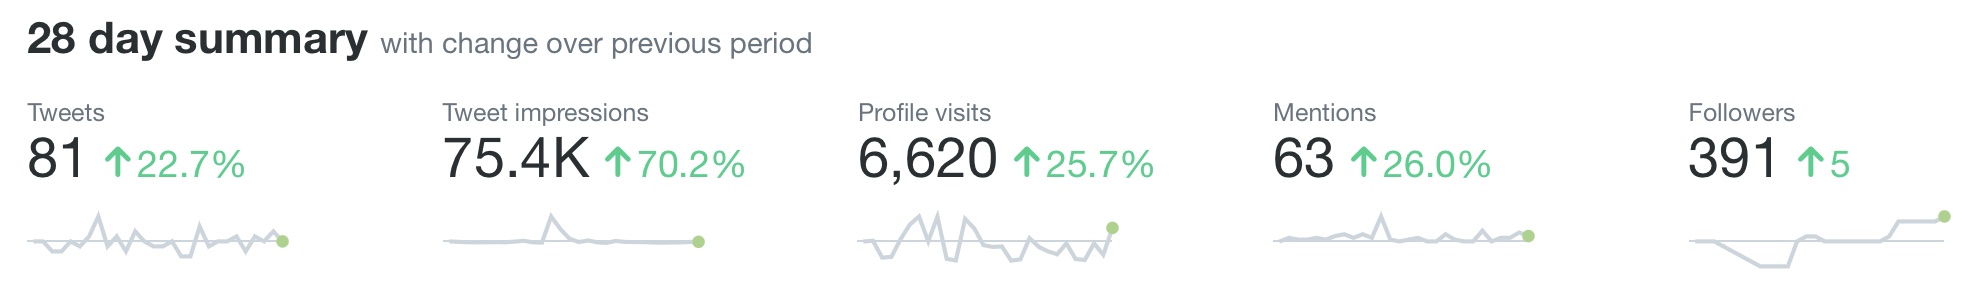 A screenshot of my Twitter analytics for June 2021. It shows 81 tweets, 75,400 tweet impressions, 6,620 profile visits, 63 mentions, and 391 followers (5 more than last month).